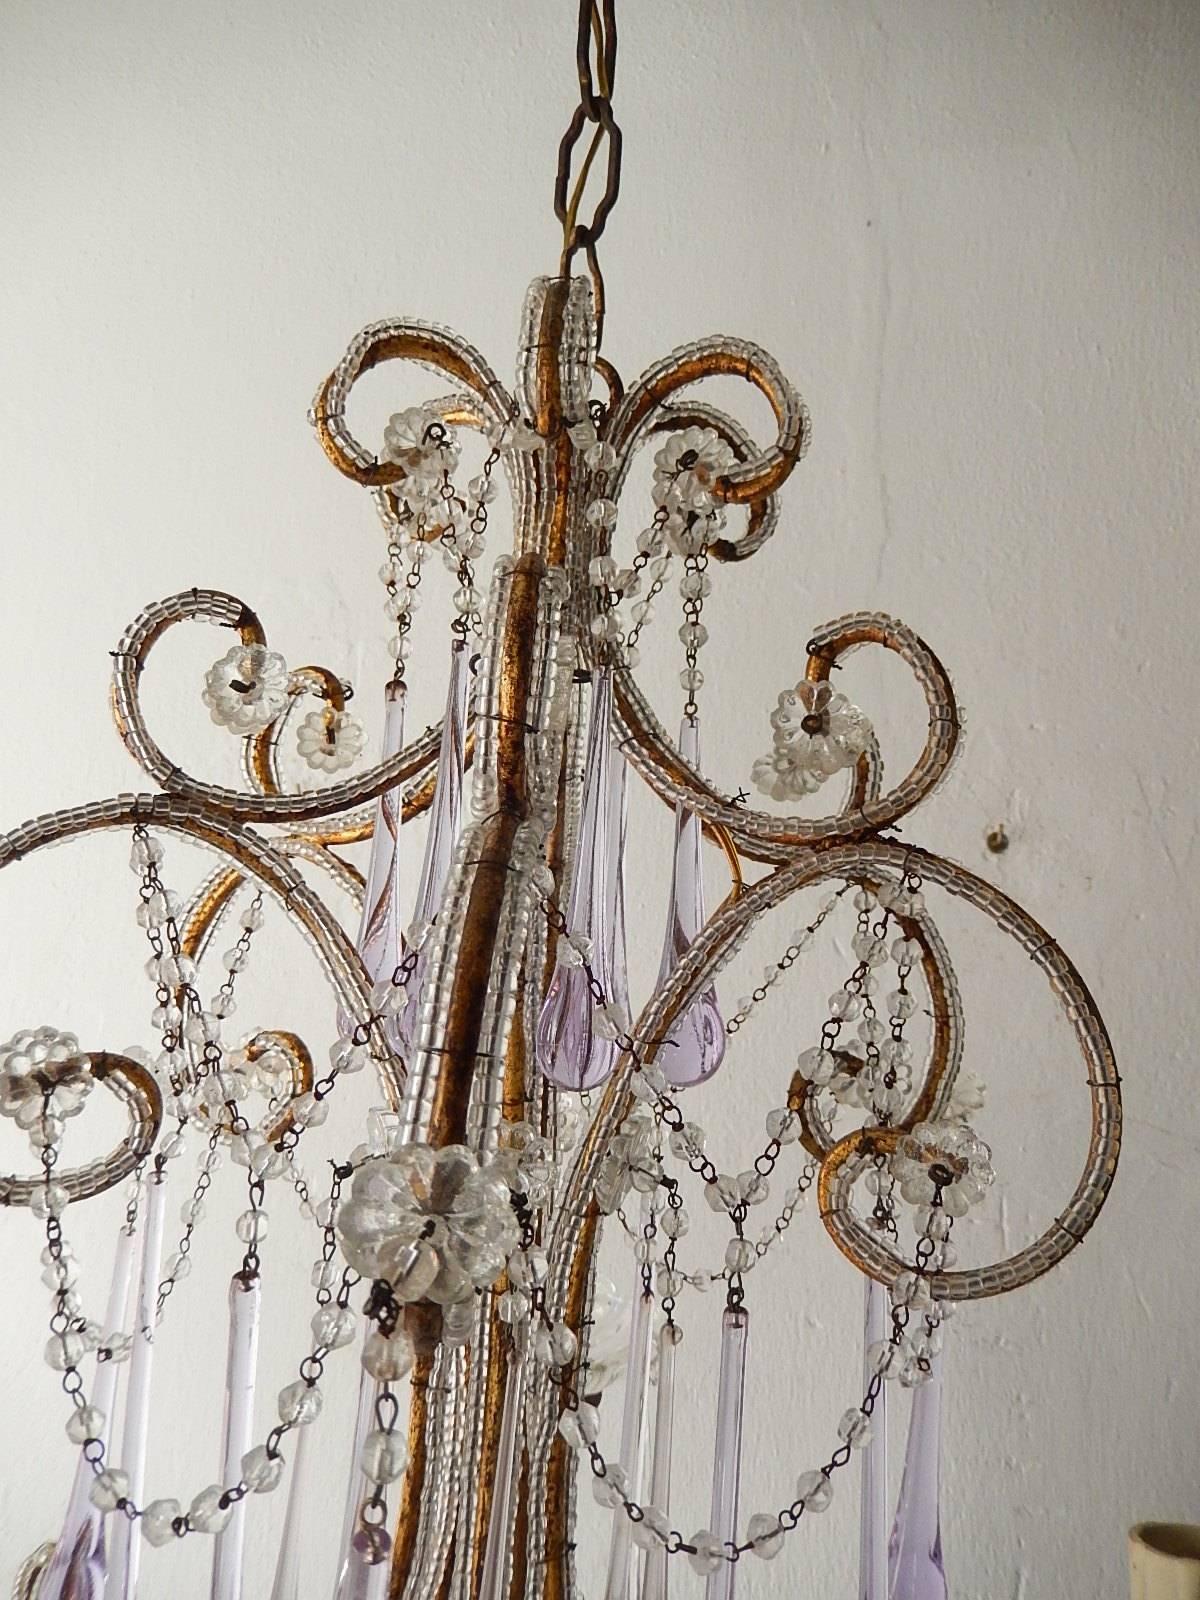 Early 20th Century French Beaded Lavender Drops Chandelier, circa 1920